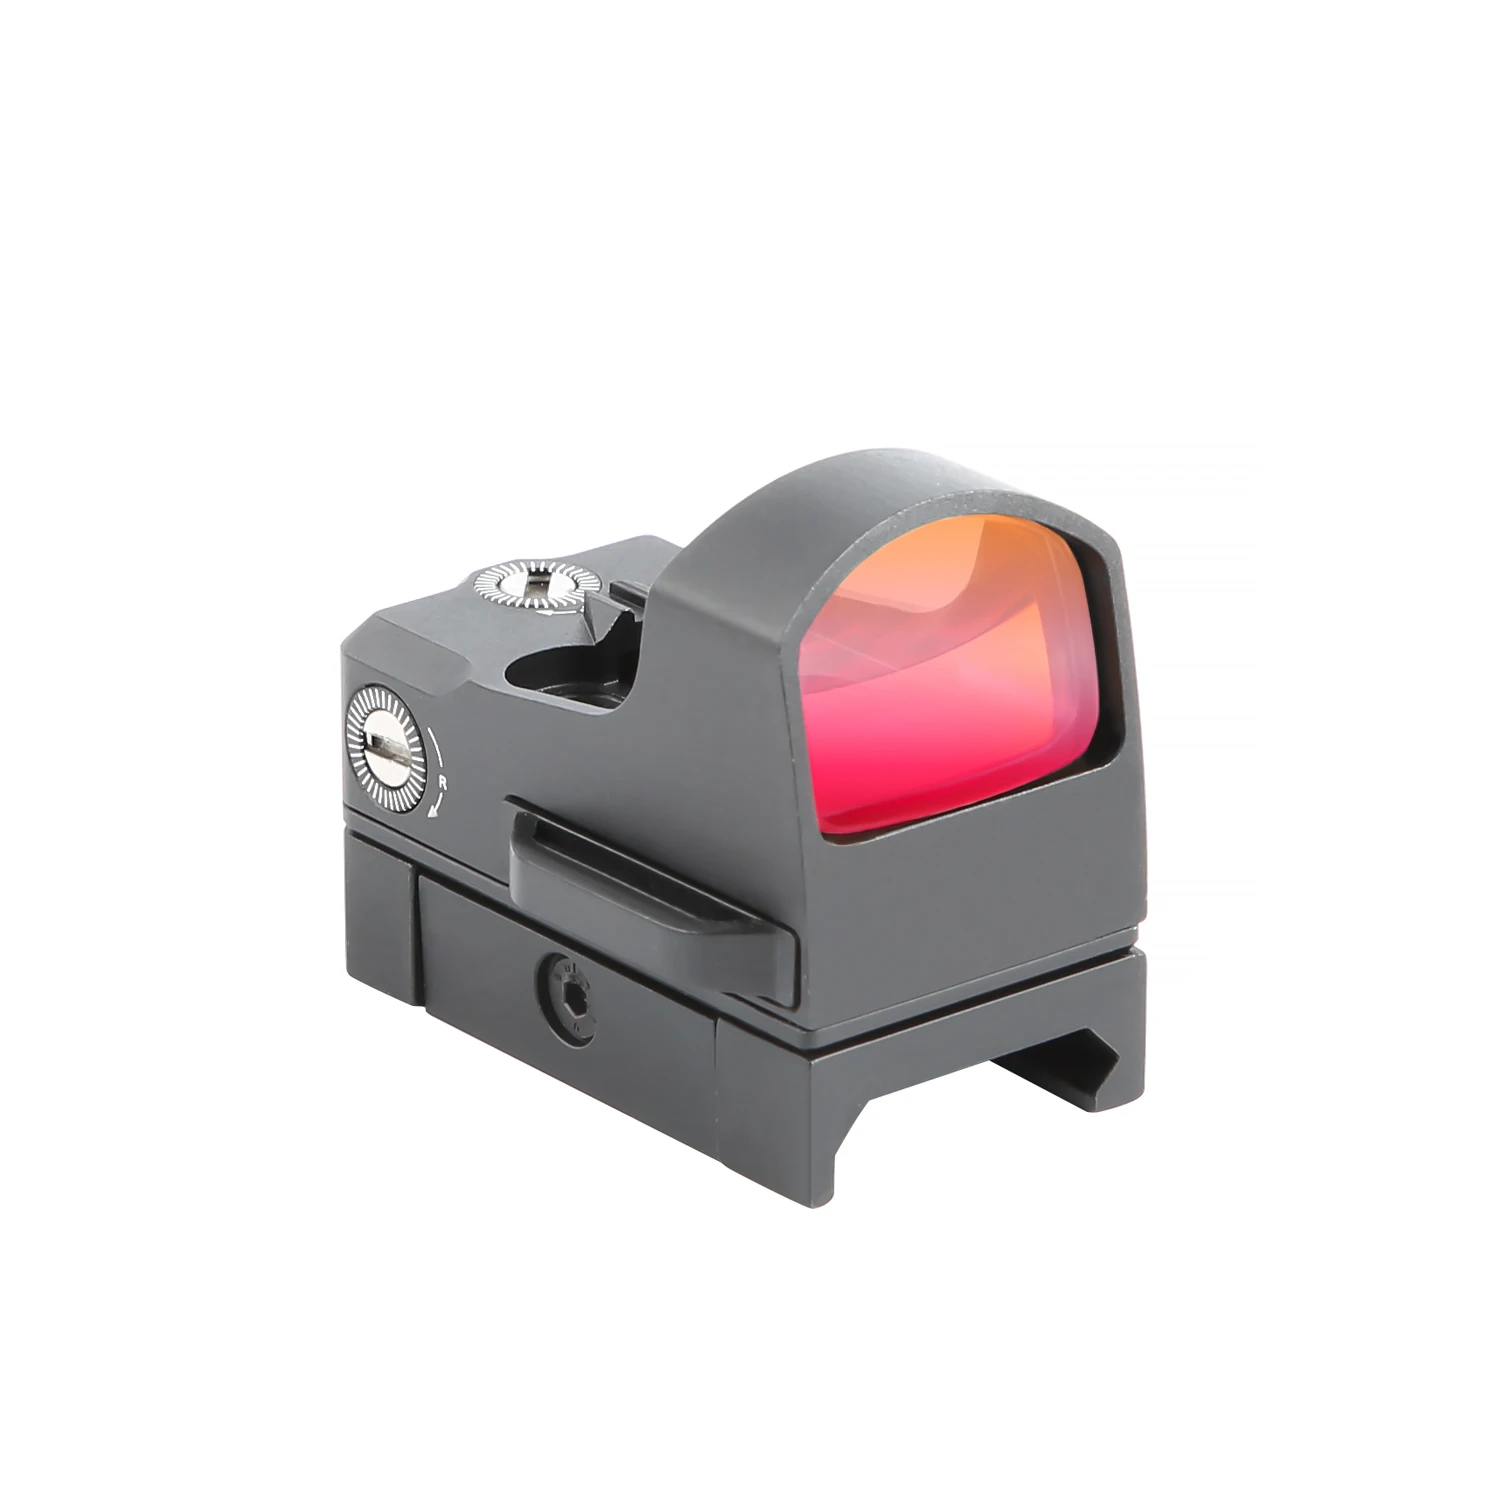 

New product KF04 hunting red dot optic scope light weight red dot tactical sight reflex sight for airgun, Black